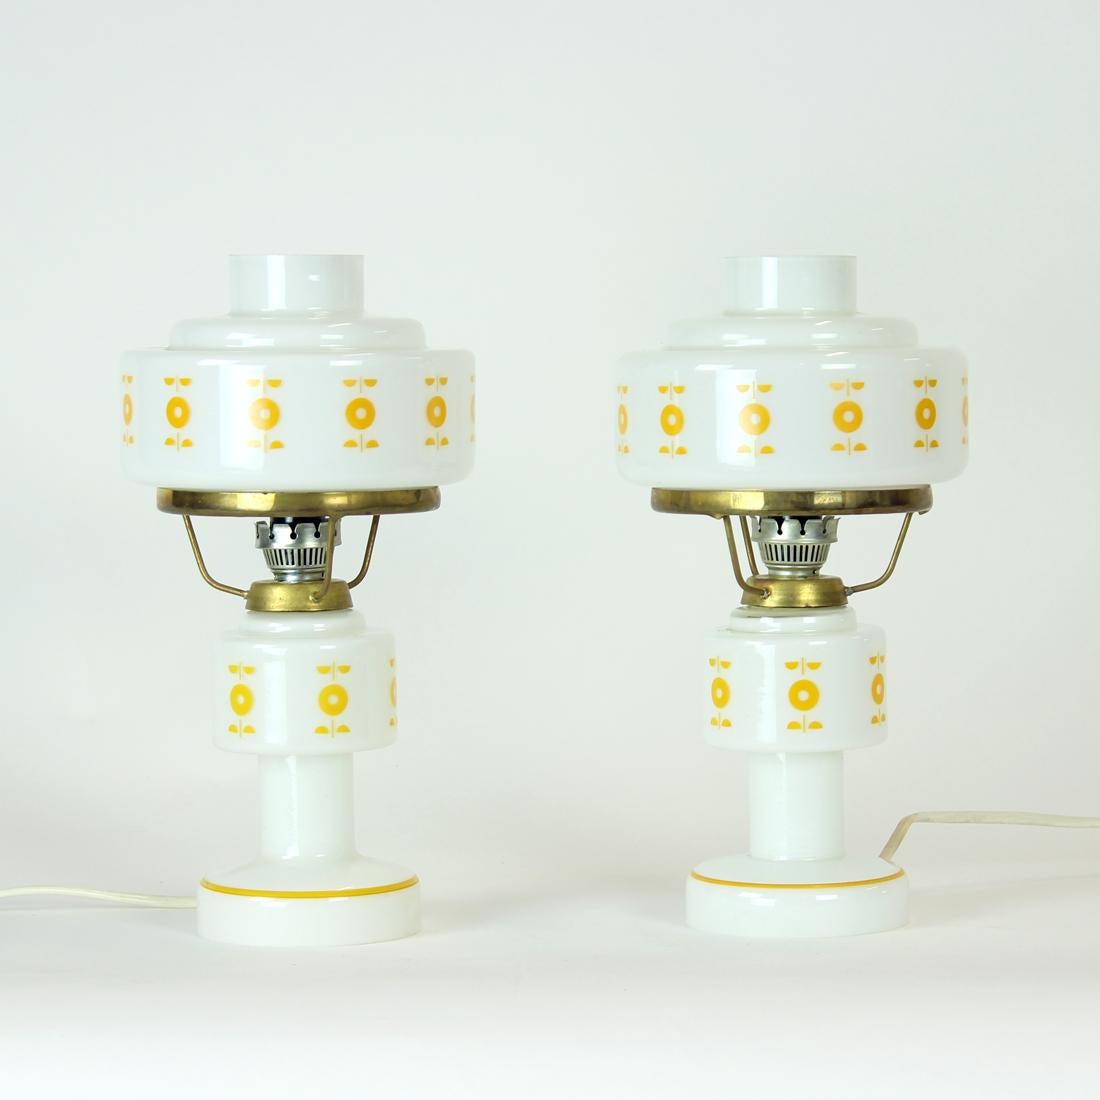 Beautiful set of two table lamps from mid-century era. Produced in 1960s as a set for nightstands. The lamps have a more classical looks of light with the touch of features typical for the design era - like the orange painted details on the shields.